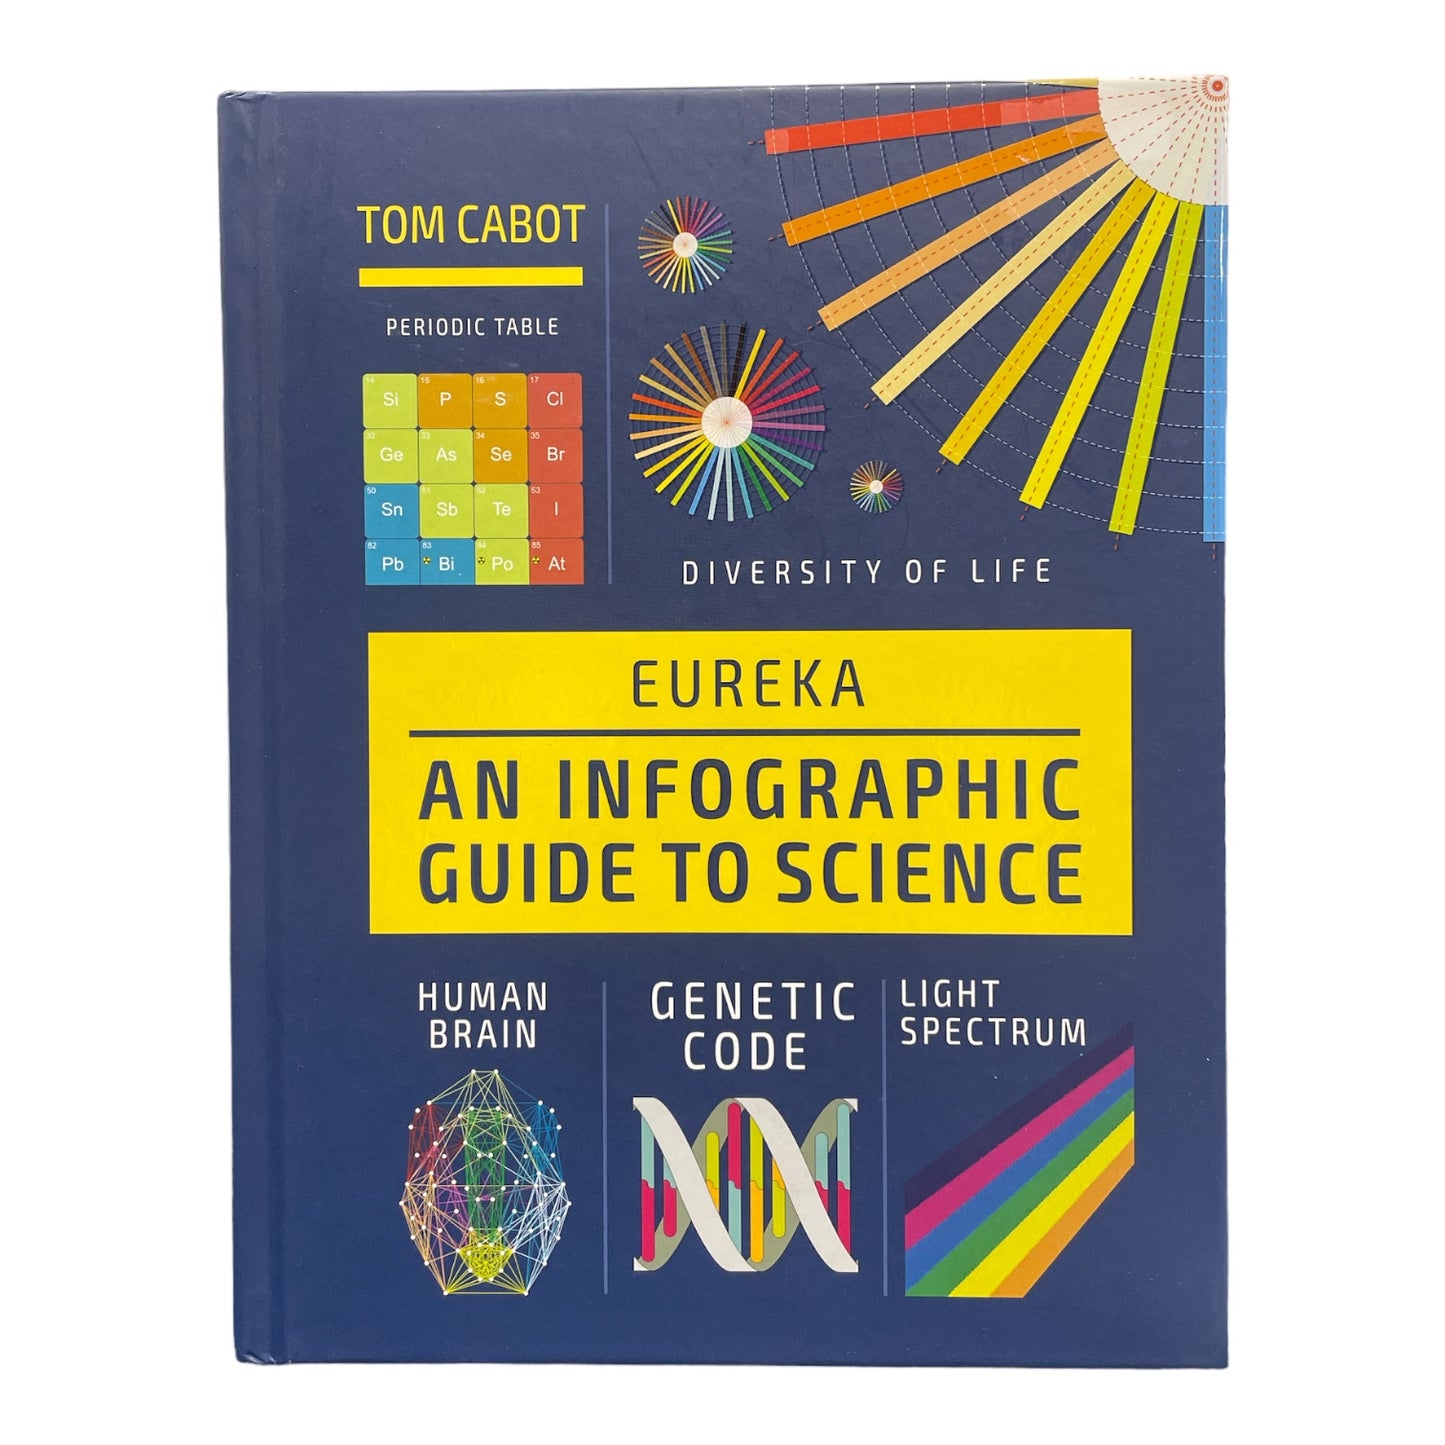 Eureka An Infographic Guide to Science Hardcover, Tom Cabot